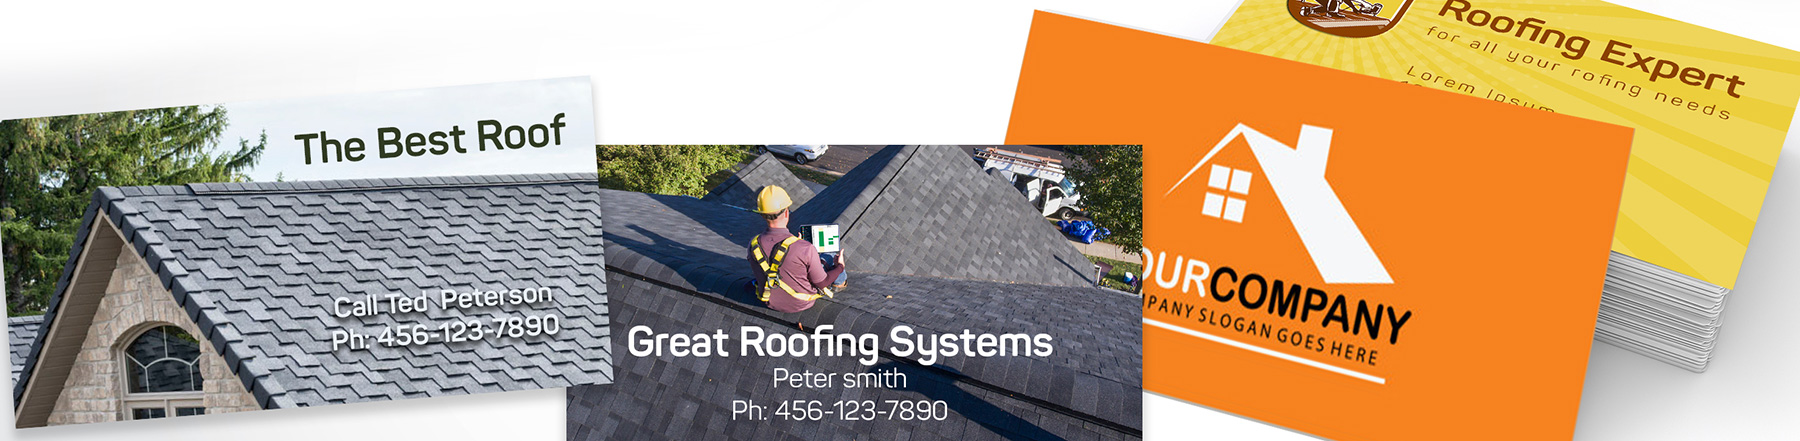 Choosing a Name for Your Roofing Business & Great Roofing Business Names